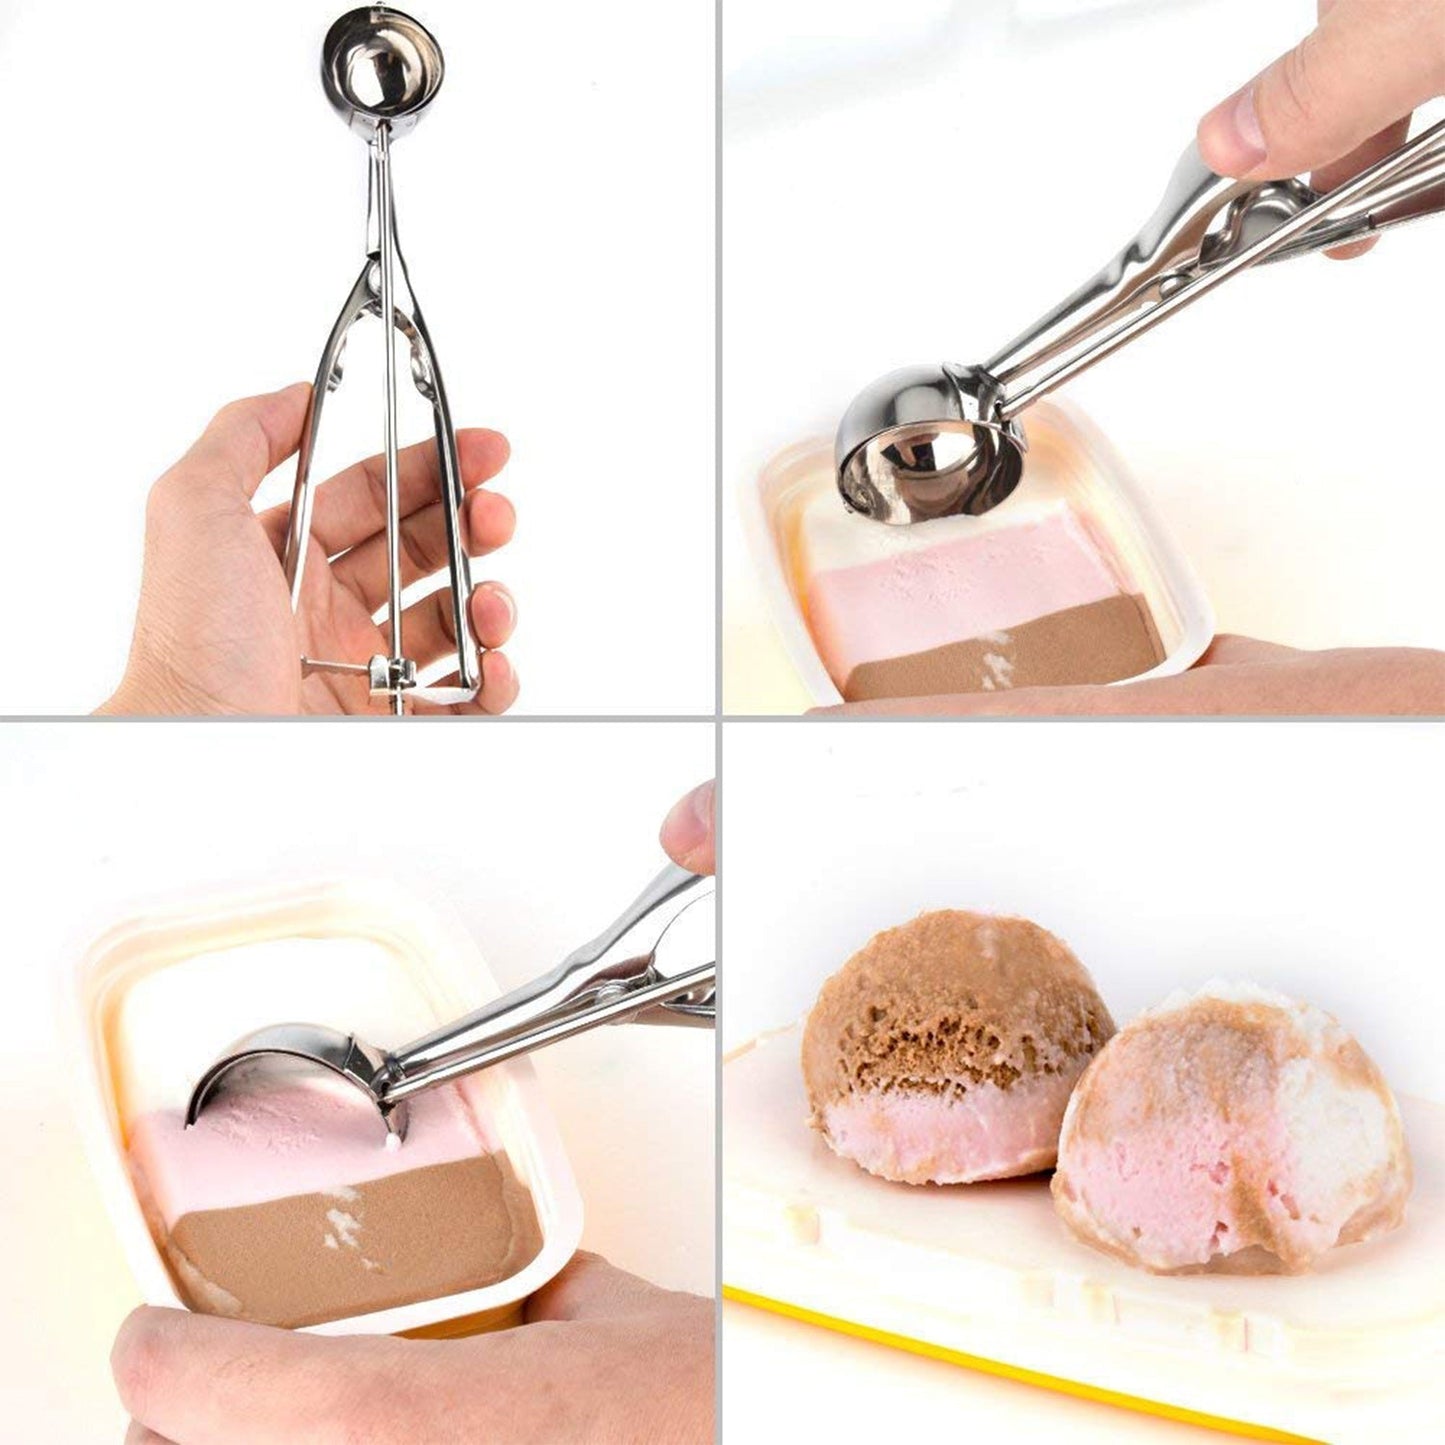 2523A Ice Cream Serving Scoop | Stainless Steel Premium Quality Ice Cream Serving Spoon Scooper with Trigger Release ( Small ) DeoDap